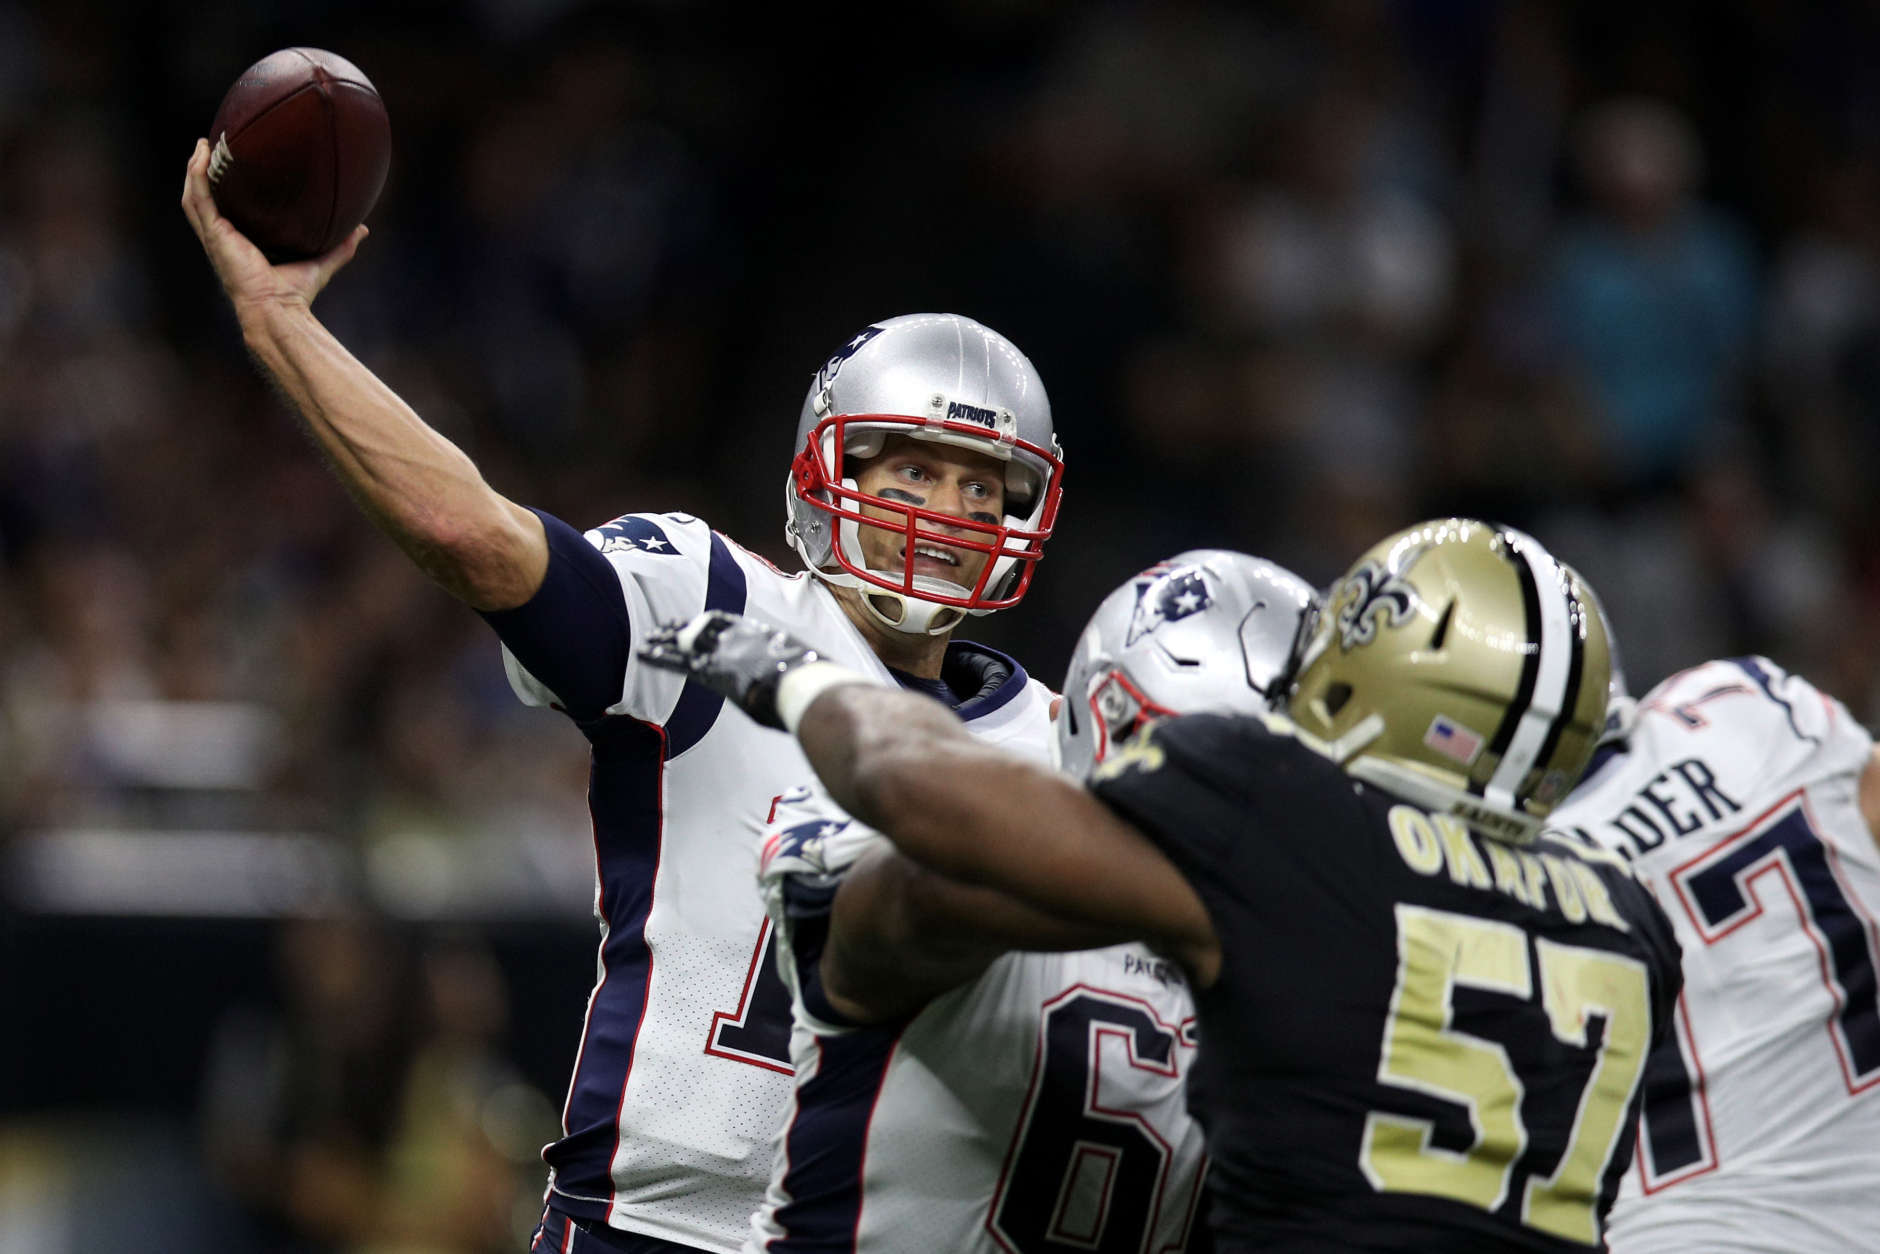 NEW ORLEANS, LA - SEPTEMBER 17:  Tom Brady #12 of the New England Patriots throws a pass against the New Orleans Saints at the Mercedes-Benz Superdome on September 17, 2017 in New Orleans, Louisiana.  (Photo by Chris Graythen/Getty Images)